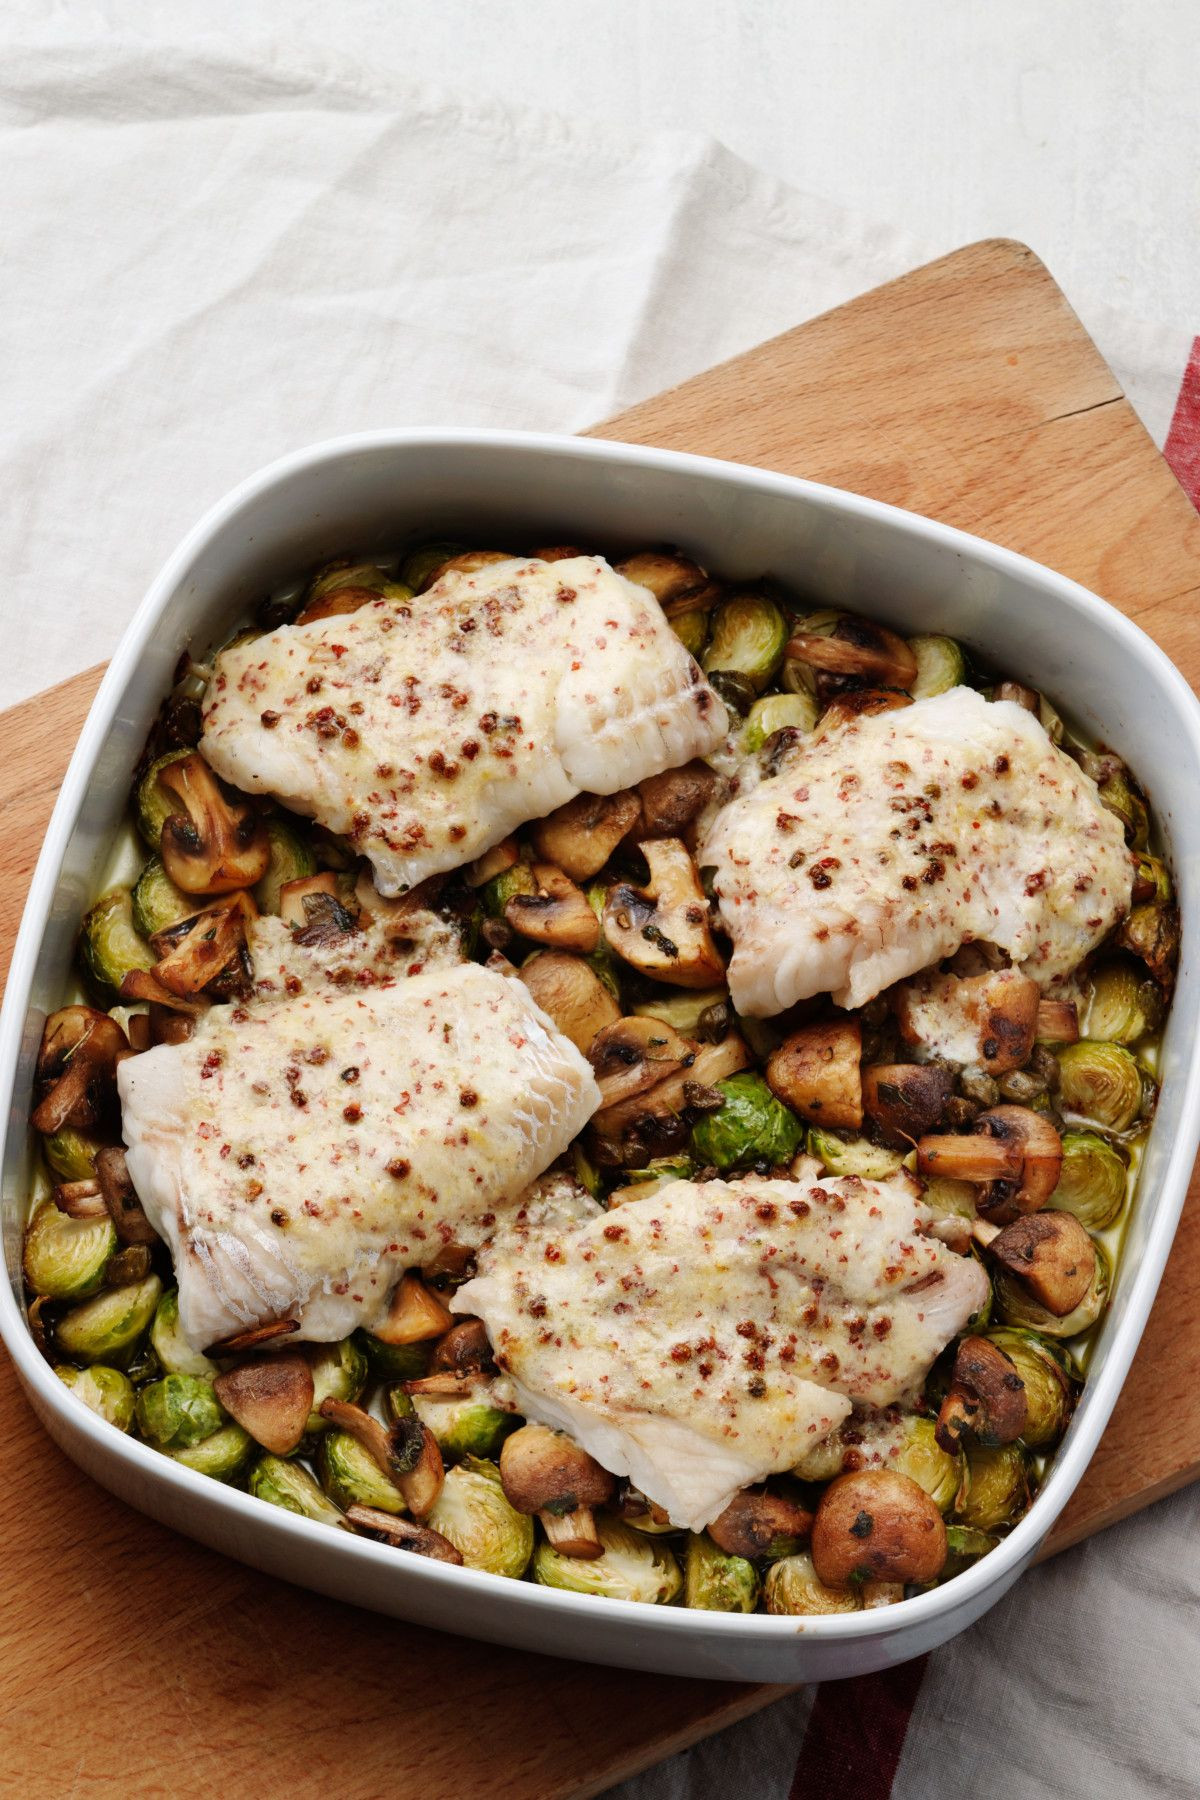 Fish And Mushrooms Recipes
 Butter baked fish with Brussels sprouts and mushrooms